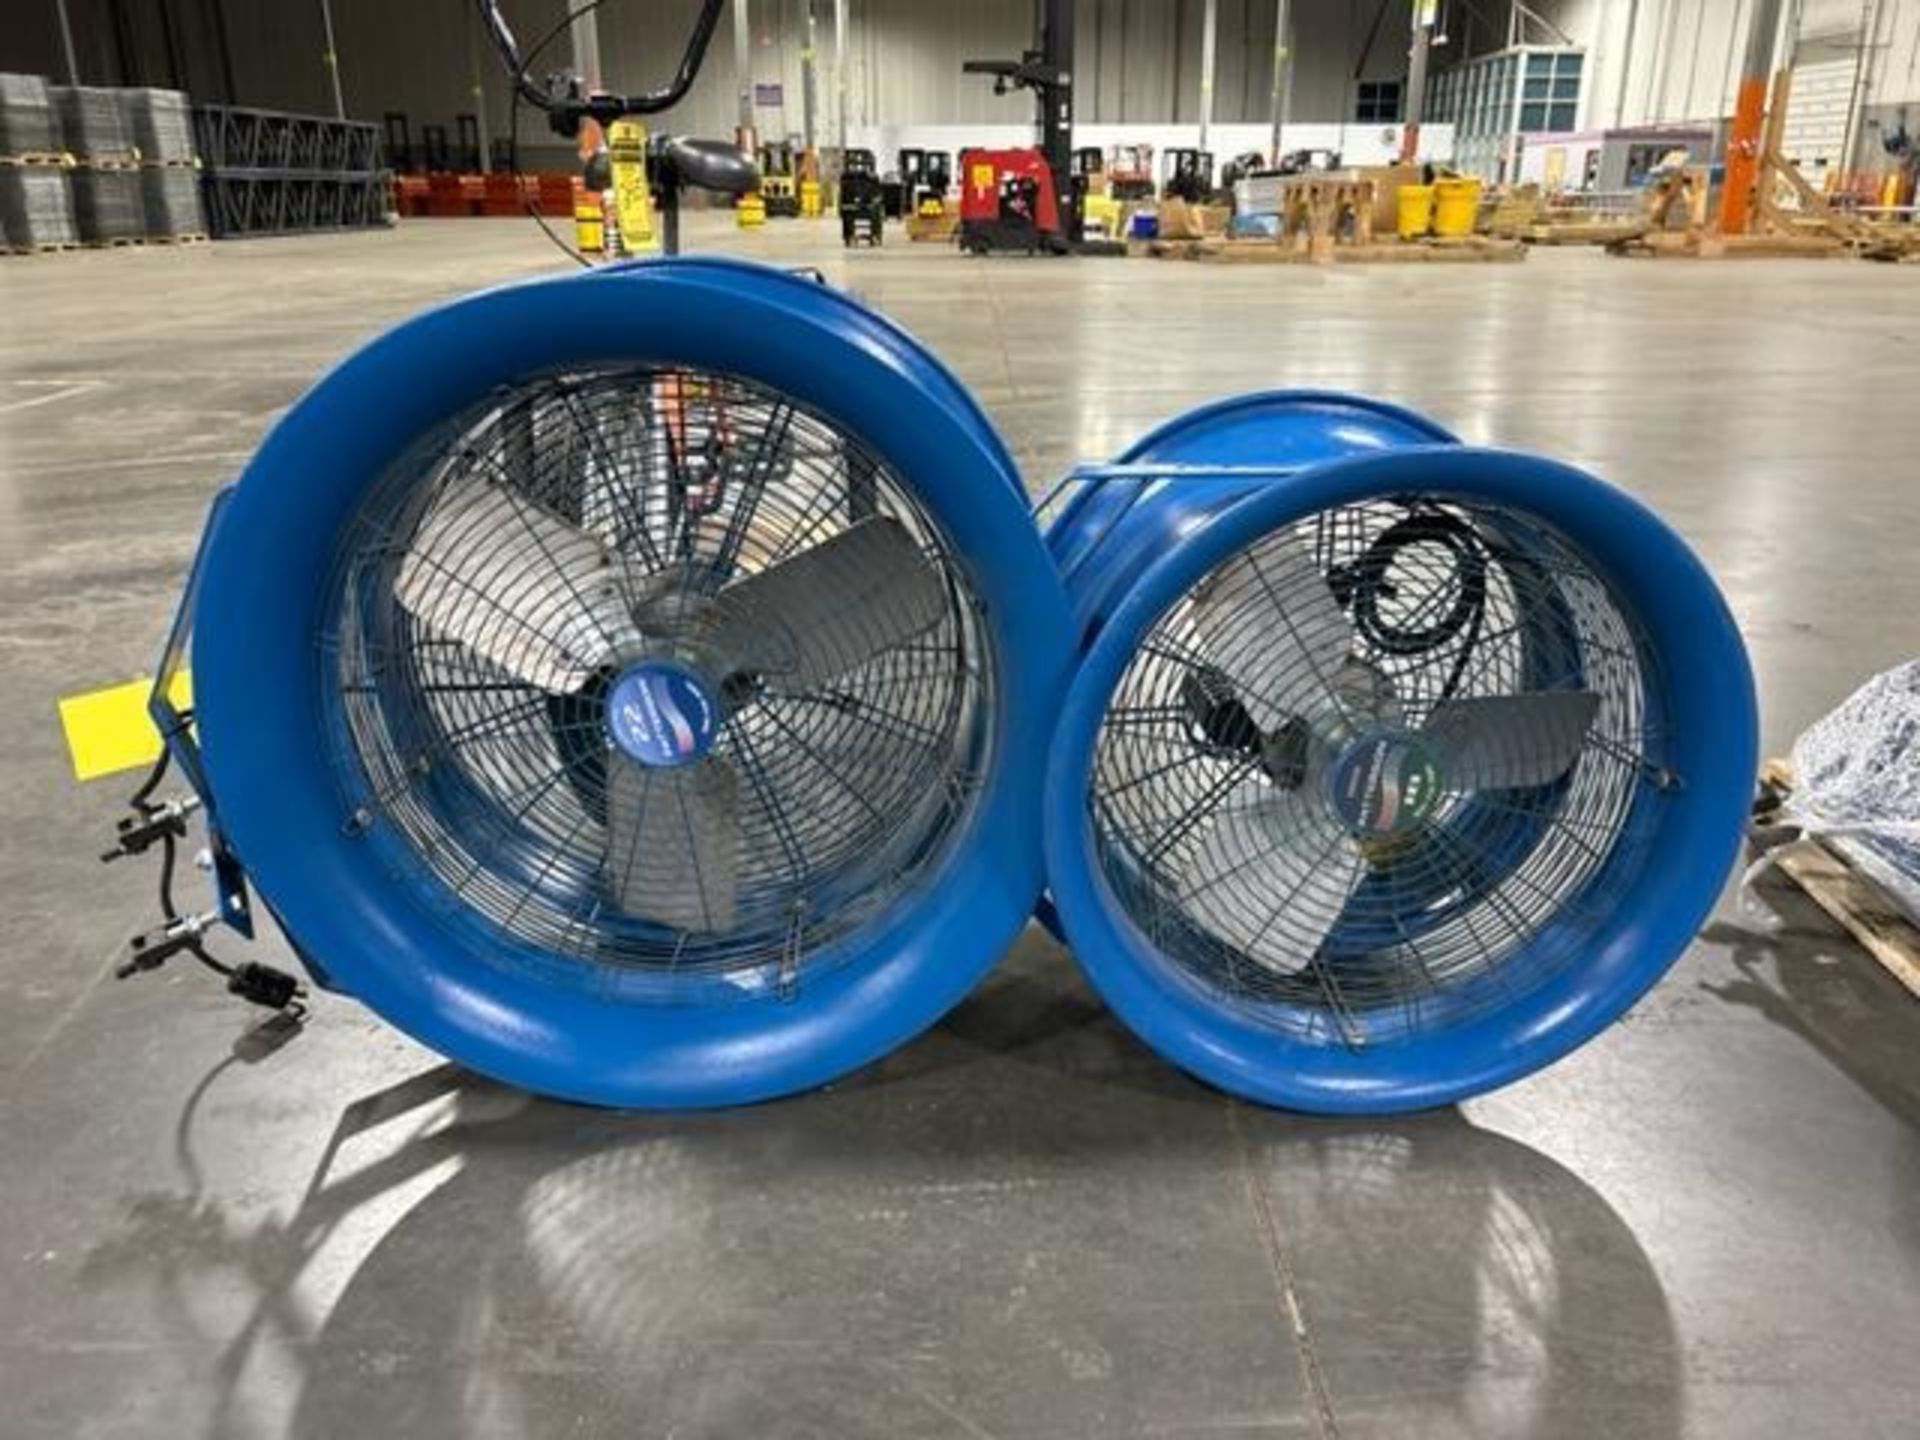 (2x) Patterson 22" & 18'' High Velocity Fans ($20 Loading Fee Will Be Added To Invoice)